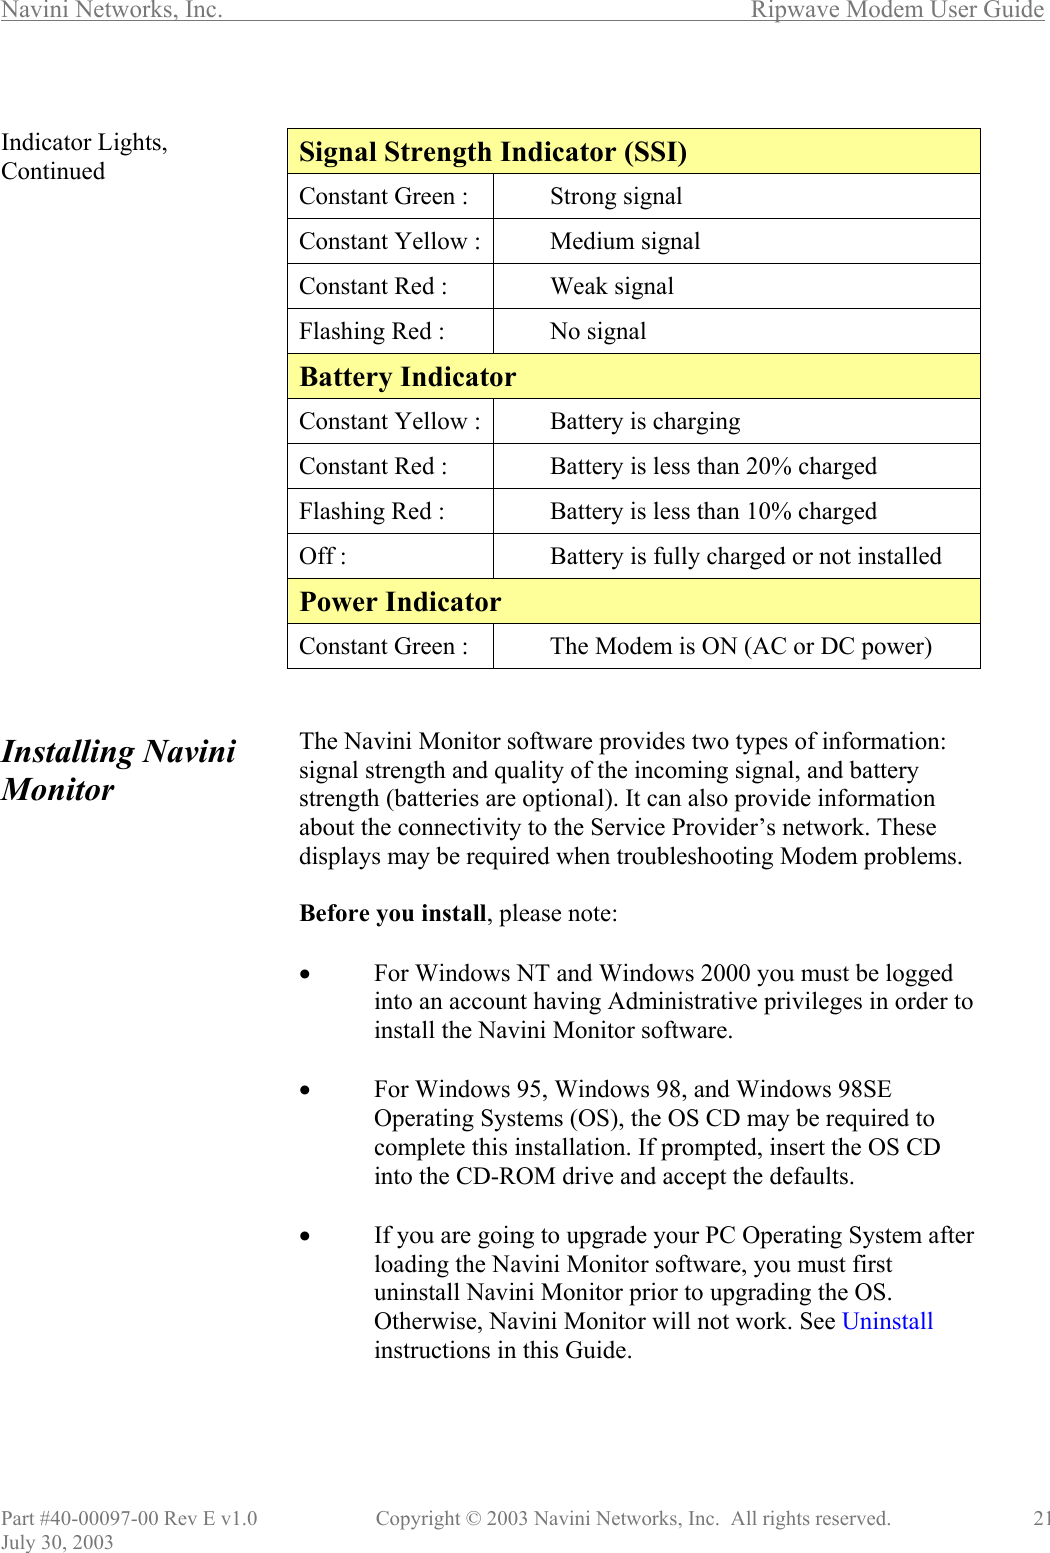 Navini Networks, Inc.        Ripwave Modem User Guide Part #40-00097-00 Rev E v1.0    Copyright © 2003 Navini Networks, Inc.  All rights reserved.               21 July 30, 2003  Indicator Lights, Continued                    Installing Navini Monitor                       Signal Strength Indicator (SSI) Constant Green :  Strong signal Constant Yellow : Medium signal Constant Red :  Weak signal Flashing Red :  No signal Battery Indicator Constant Yellow : Battery is charging Constant Red :  Battery is less than 20% charged Flashing Red :  Battery is less than 10% charged Off :  Battery is fully charged or not installed Power Indicator Constant Green :  The Modem is ON (AC or DC power)   The Navini Monitor software provides two types of information: signal strength and quality of the incoming signal, and battery strength (batteries are optional). It can also provide information about the connectivity to the Service Provider’s network. These displays may be required when troubleshooting Modem problems.  Before you install, please note:  •  For Windows NT and Windows 2000 you must be logged into an account having Administrative privileges in order to install the Navini Monitor software.   •  For Windows 95, Windows 98, and Windows 98SE Operating Systems (OS), the OS CD may be required to complete this installation. If prompted, insert the OS CD into the CD-ROM drive and accept the defaults.  •  If you are going to upgrade your PC Operating System after loading the Navini Monitor software, you must first uninstall Navini Monitor prior to upgrading the OS. Otherwise, Navini Monitor will not work. See Uninstall instructions in this Guide.   